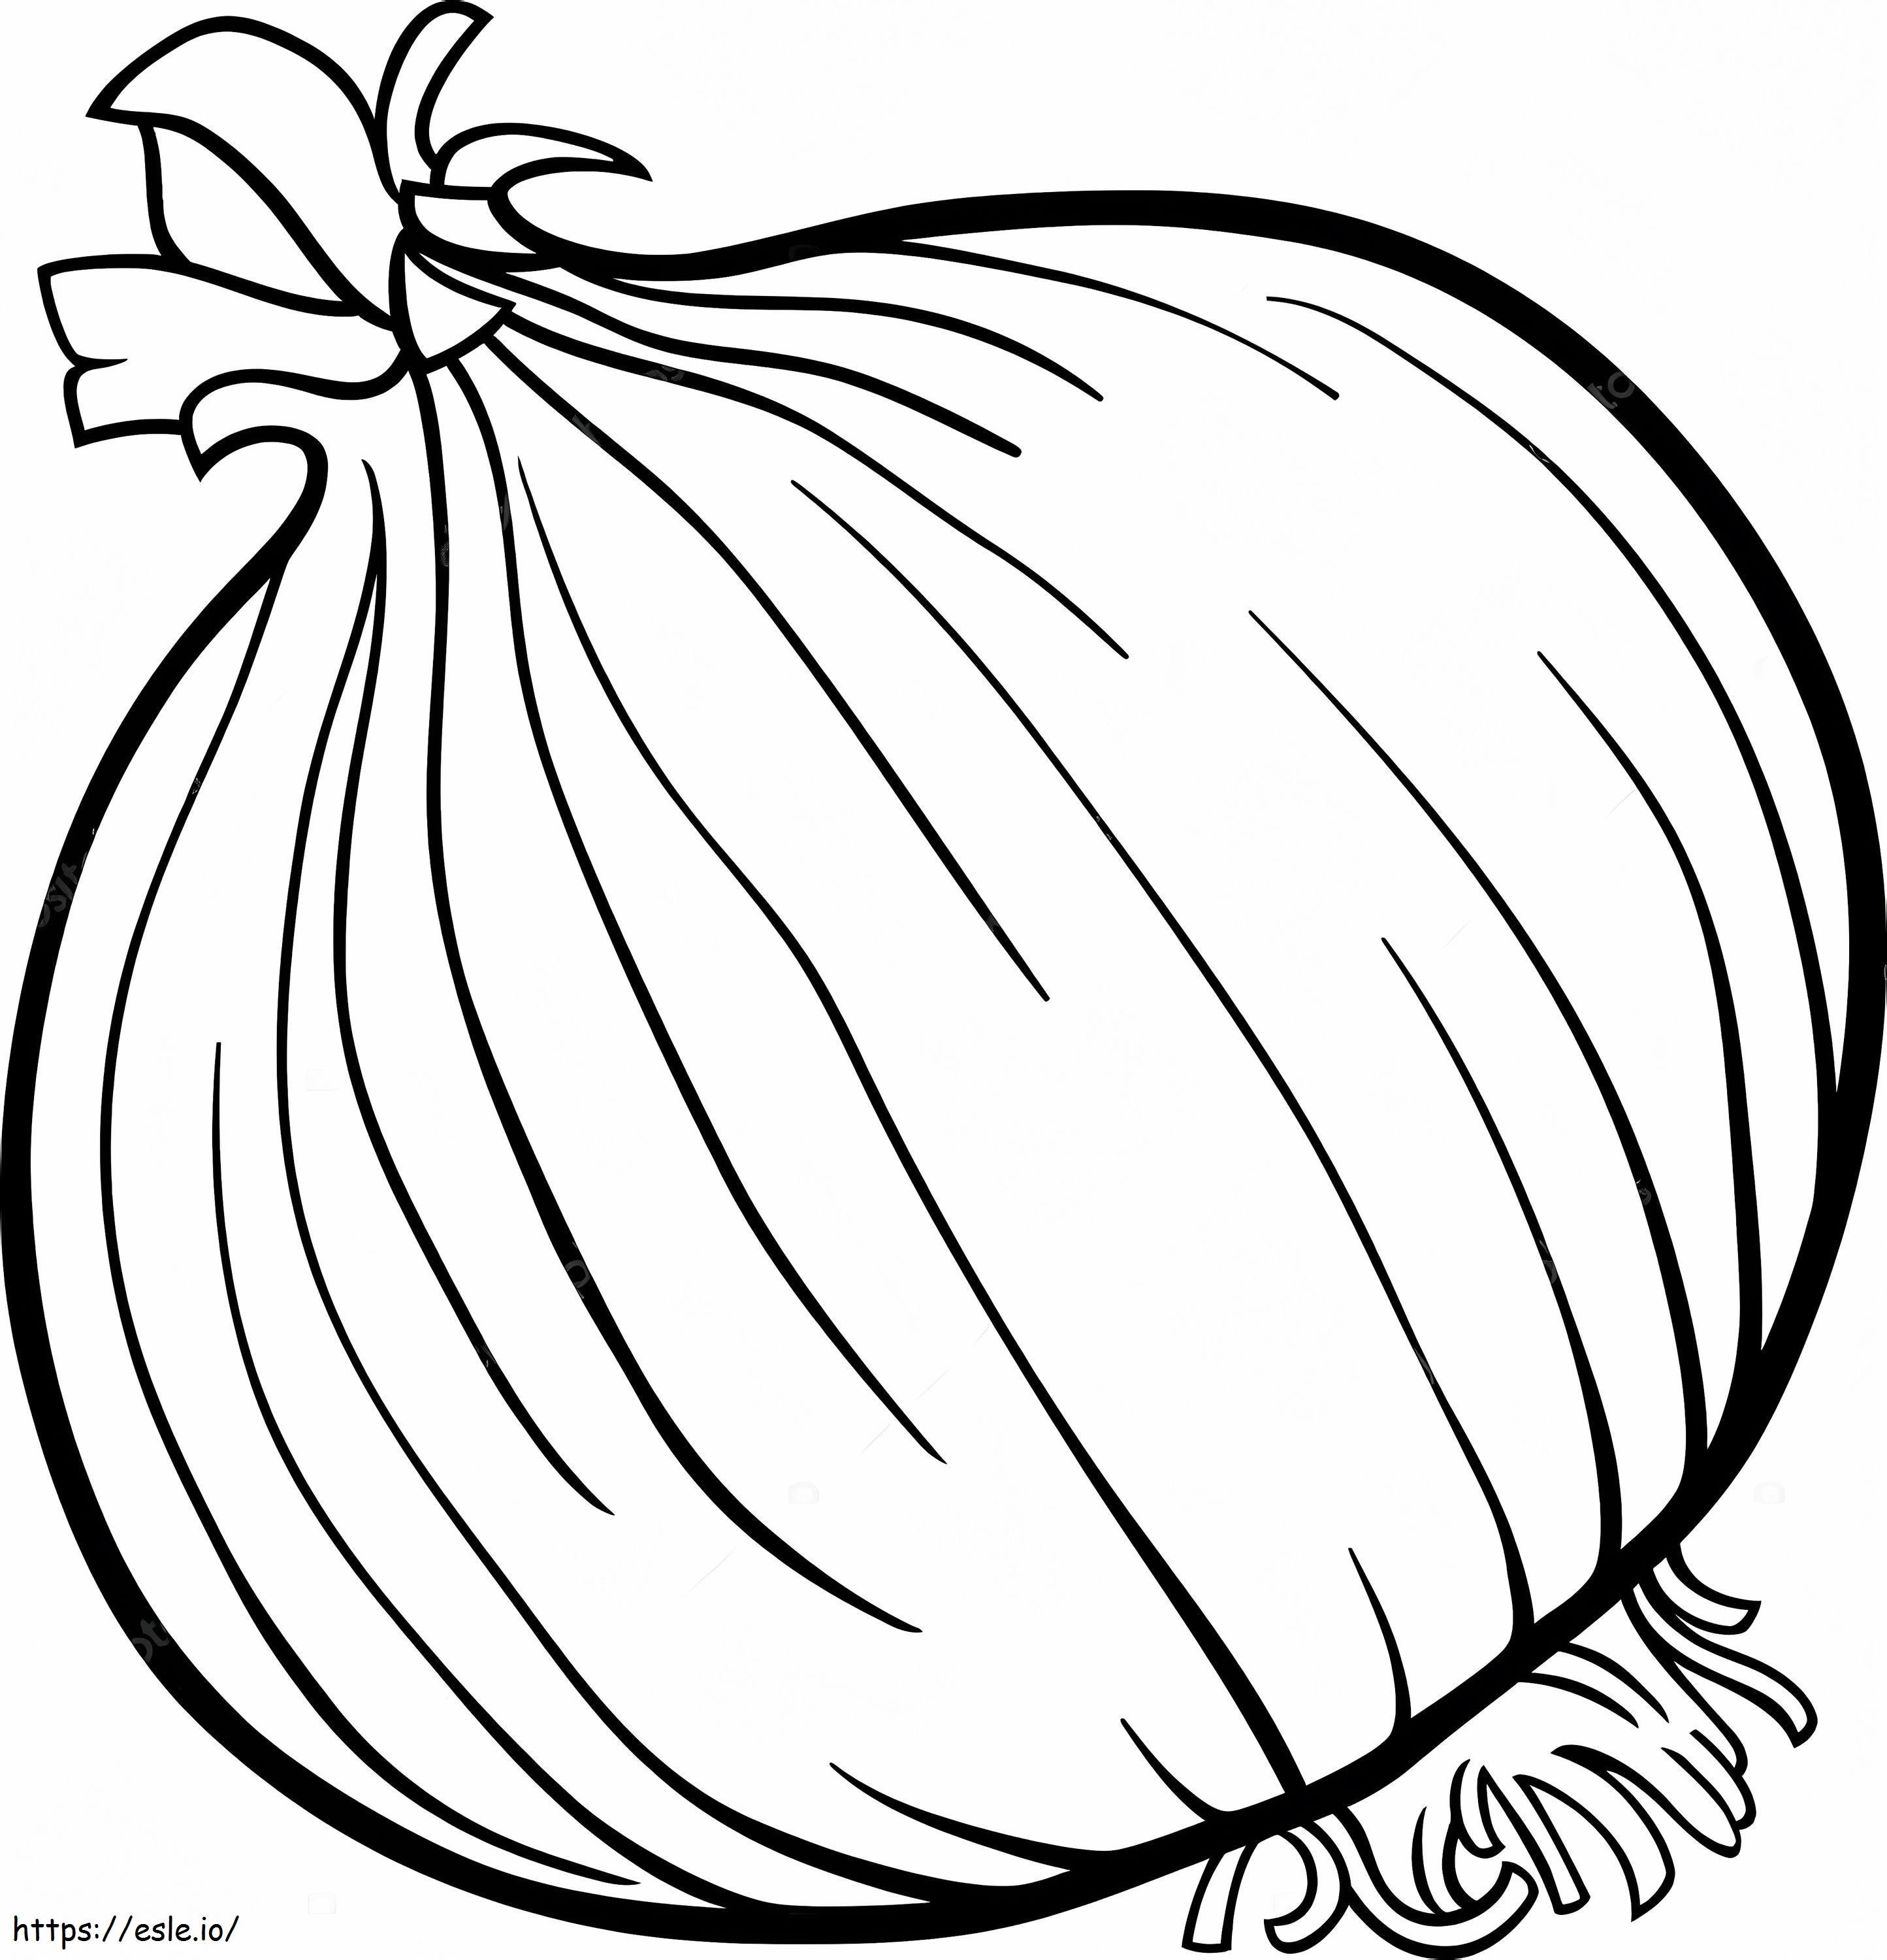 Regular Onion coloring page